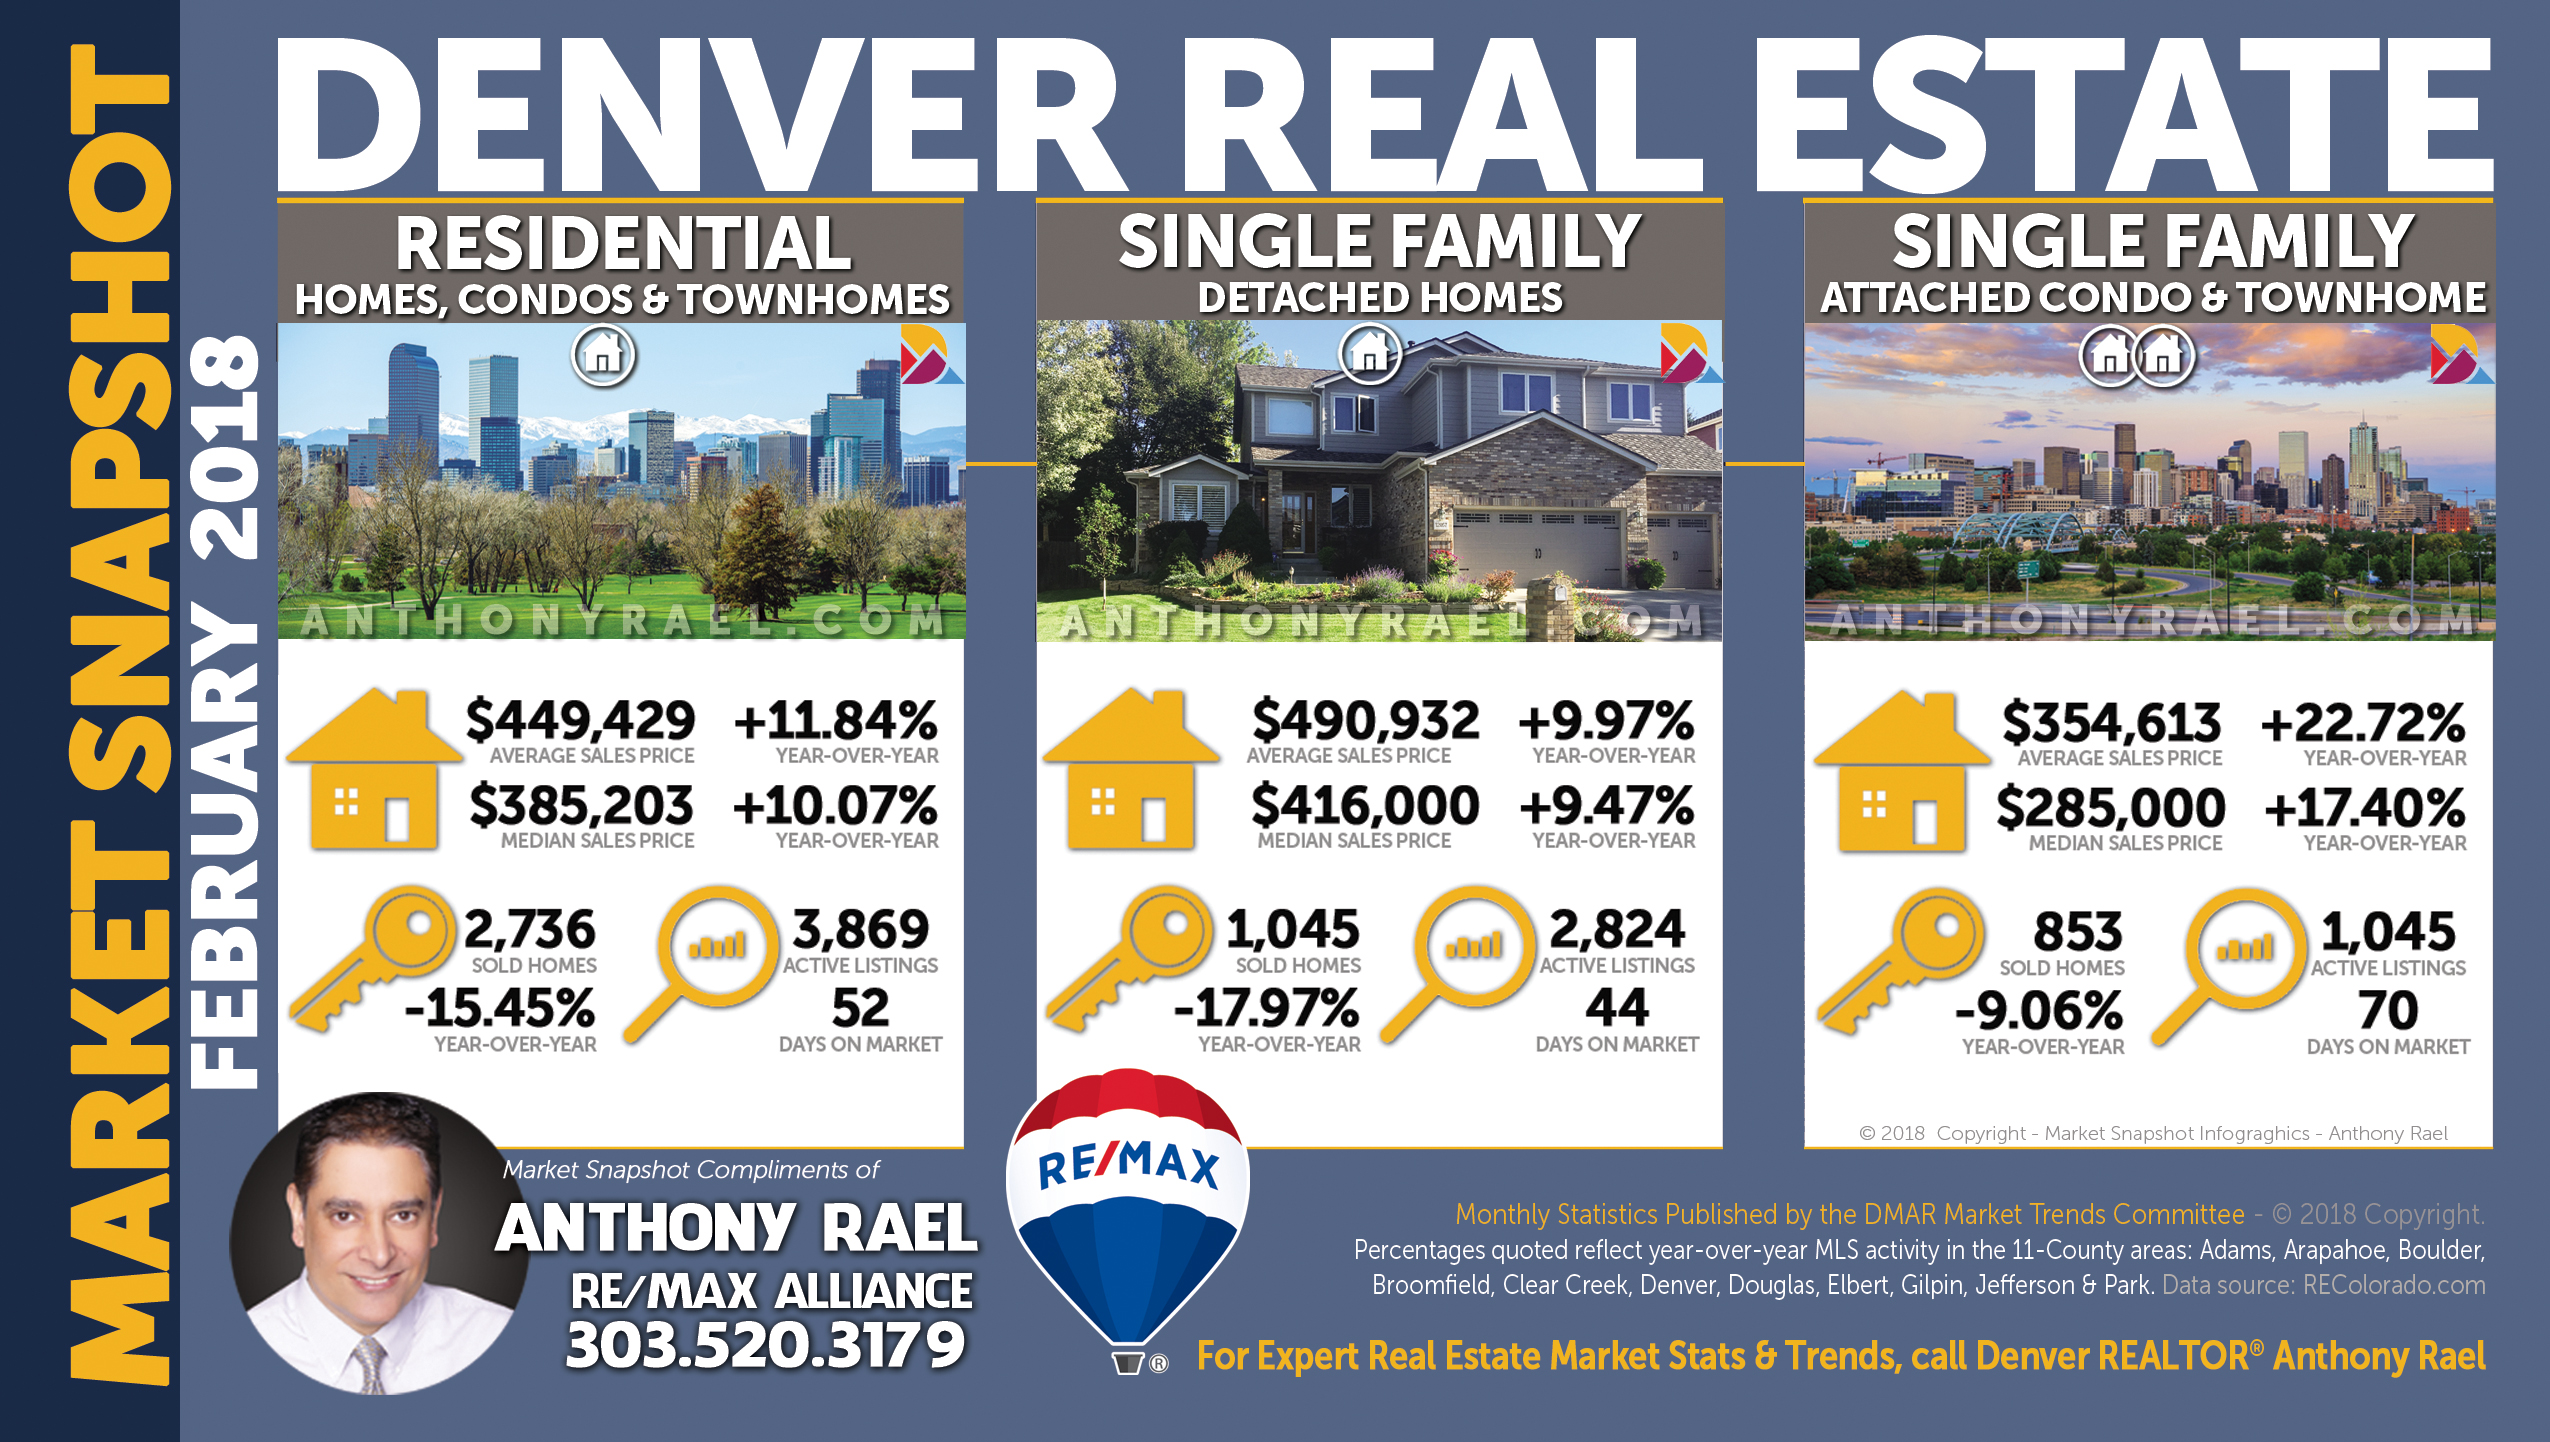 Denver Colorado Single Family Homes | Single Family Condos | Residential Market | Luxury Market ($1 Million+). Year-over-Year Look at Denver Colorado Home Values & Home Prices